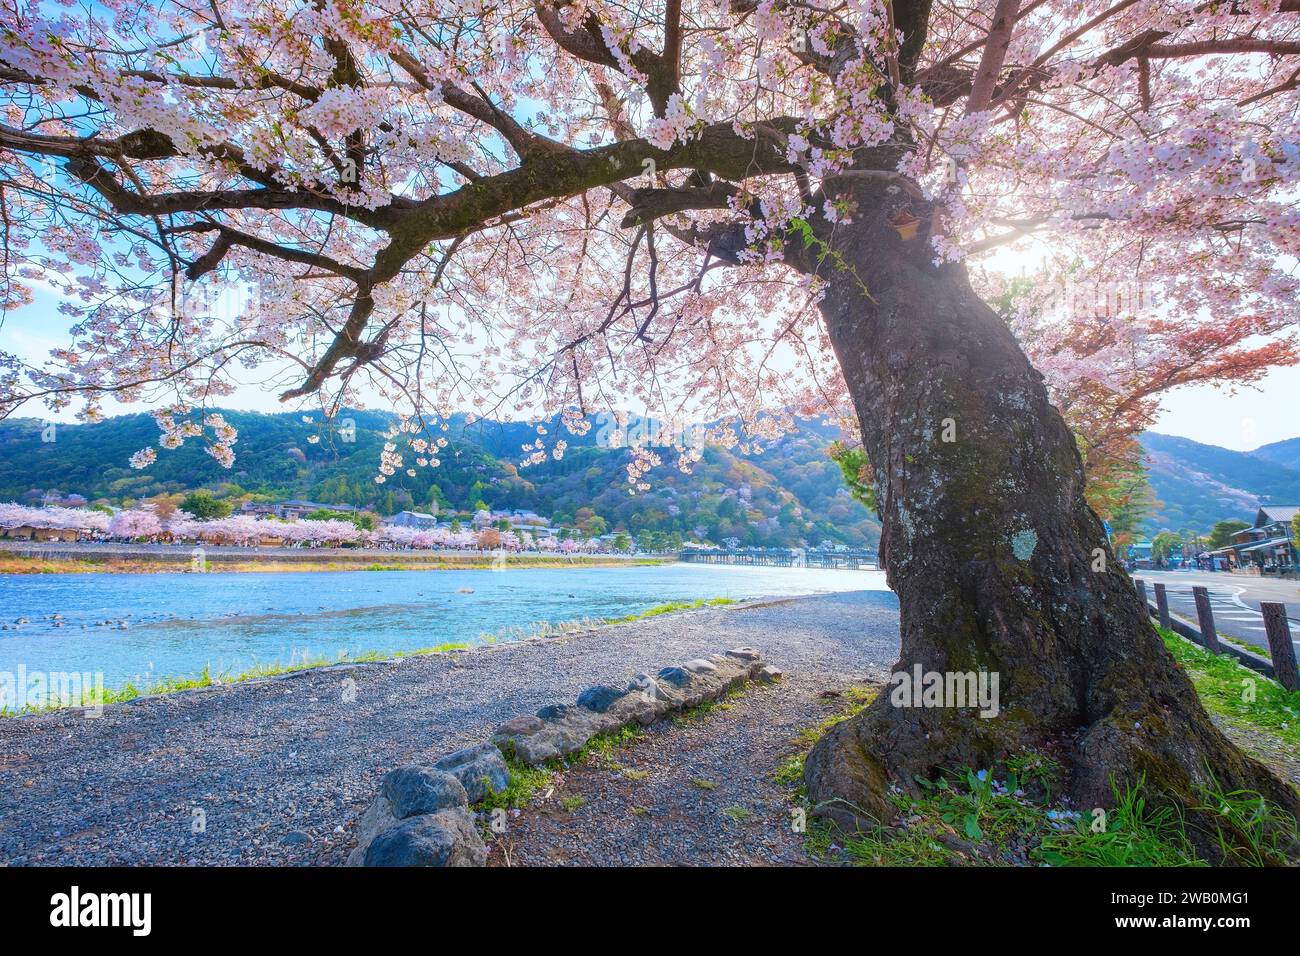 Kyoto, Japan - March 29 2023: Togetsukyo bridge that crosses the Katsura River with scenic full bloom cherry blossom in spring Stock Photo